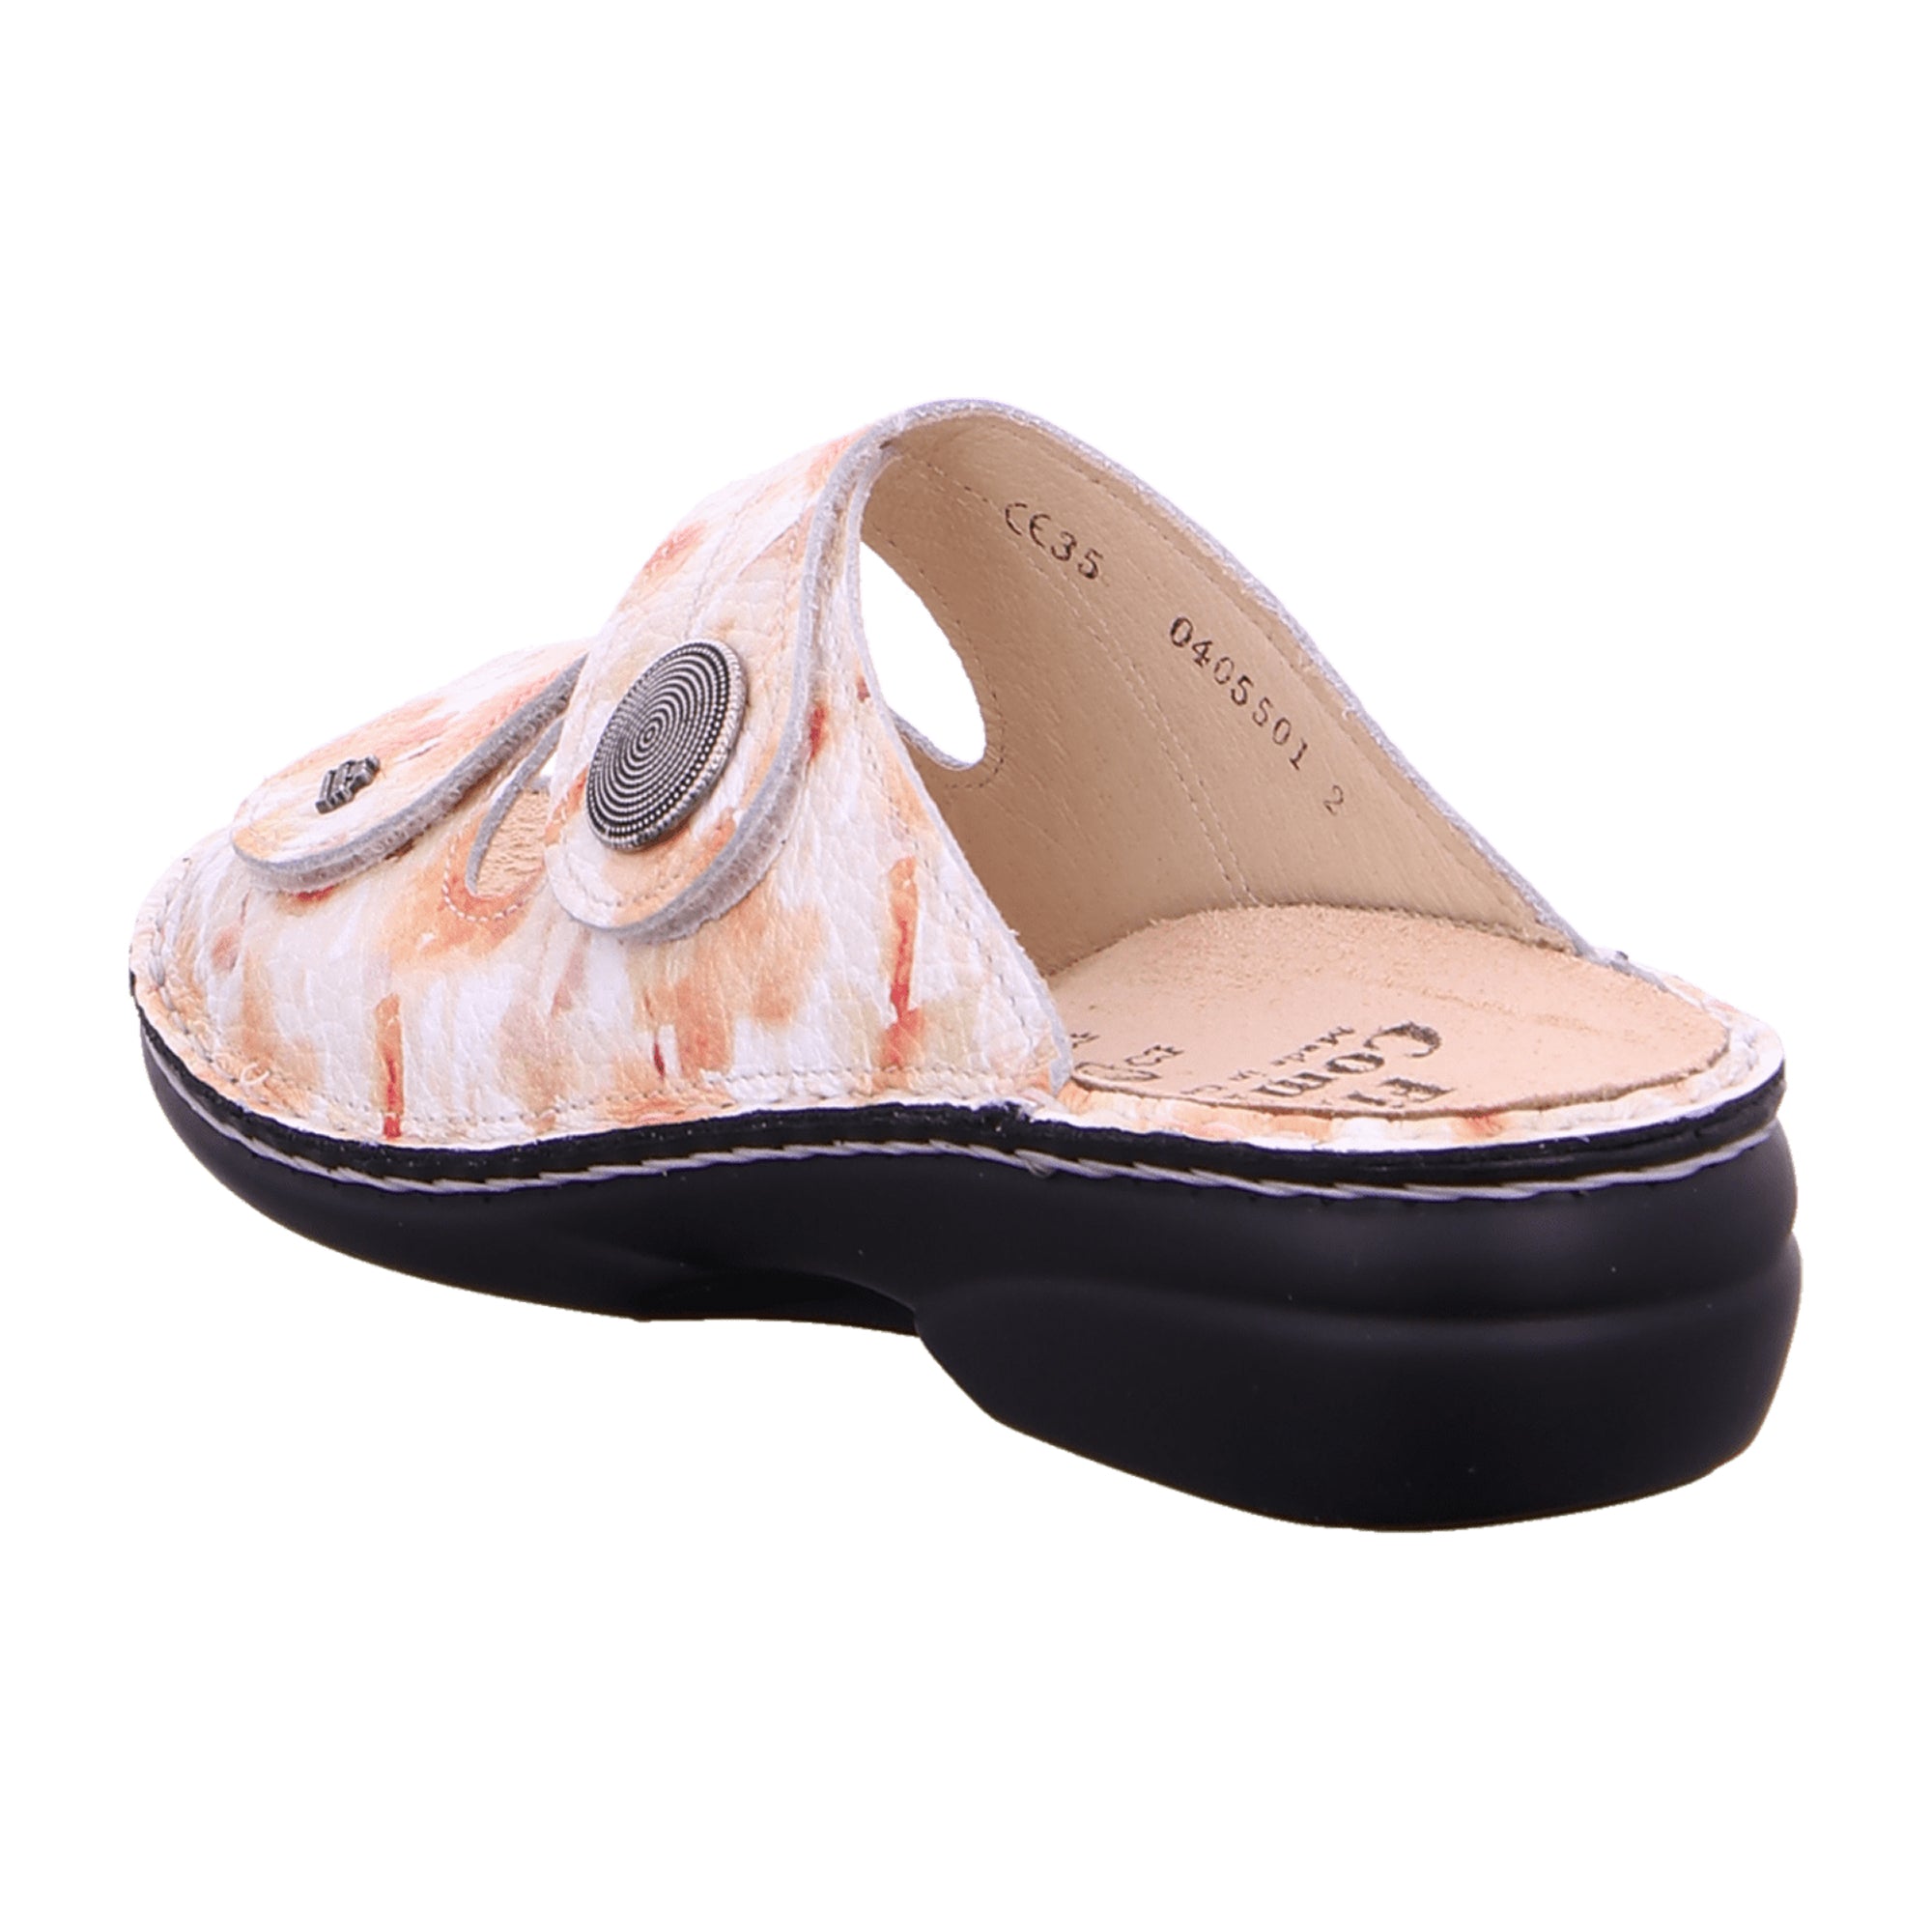 Finn Comfort Sansibar Peach Women's Sandals - Multicolor Leather Slides with Adjustable Straps and Removable Insoles